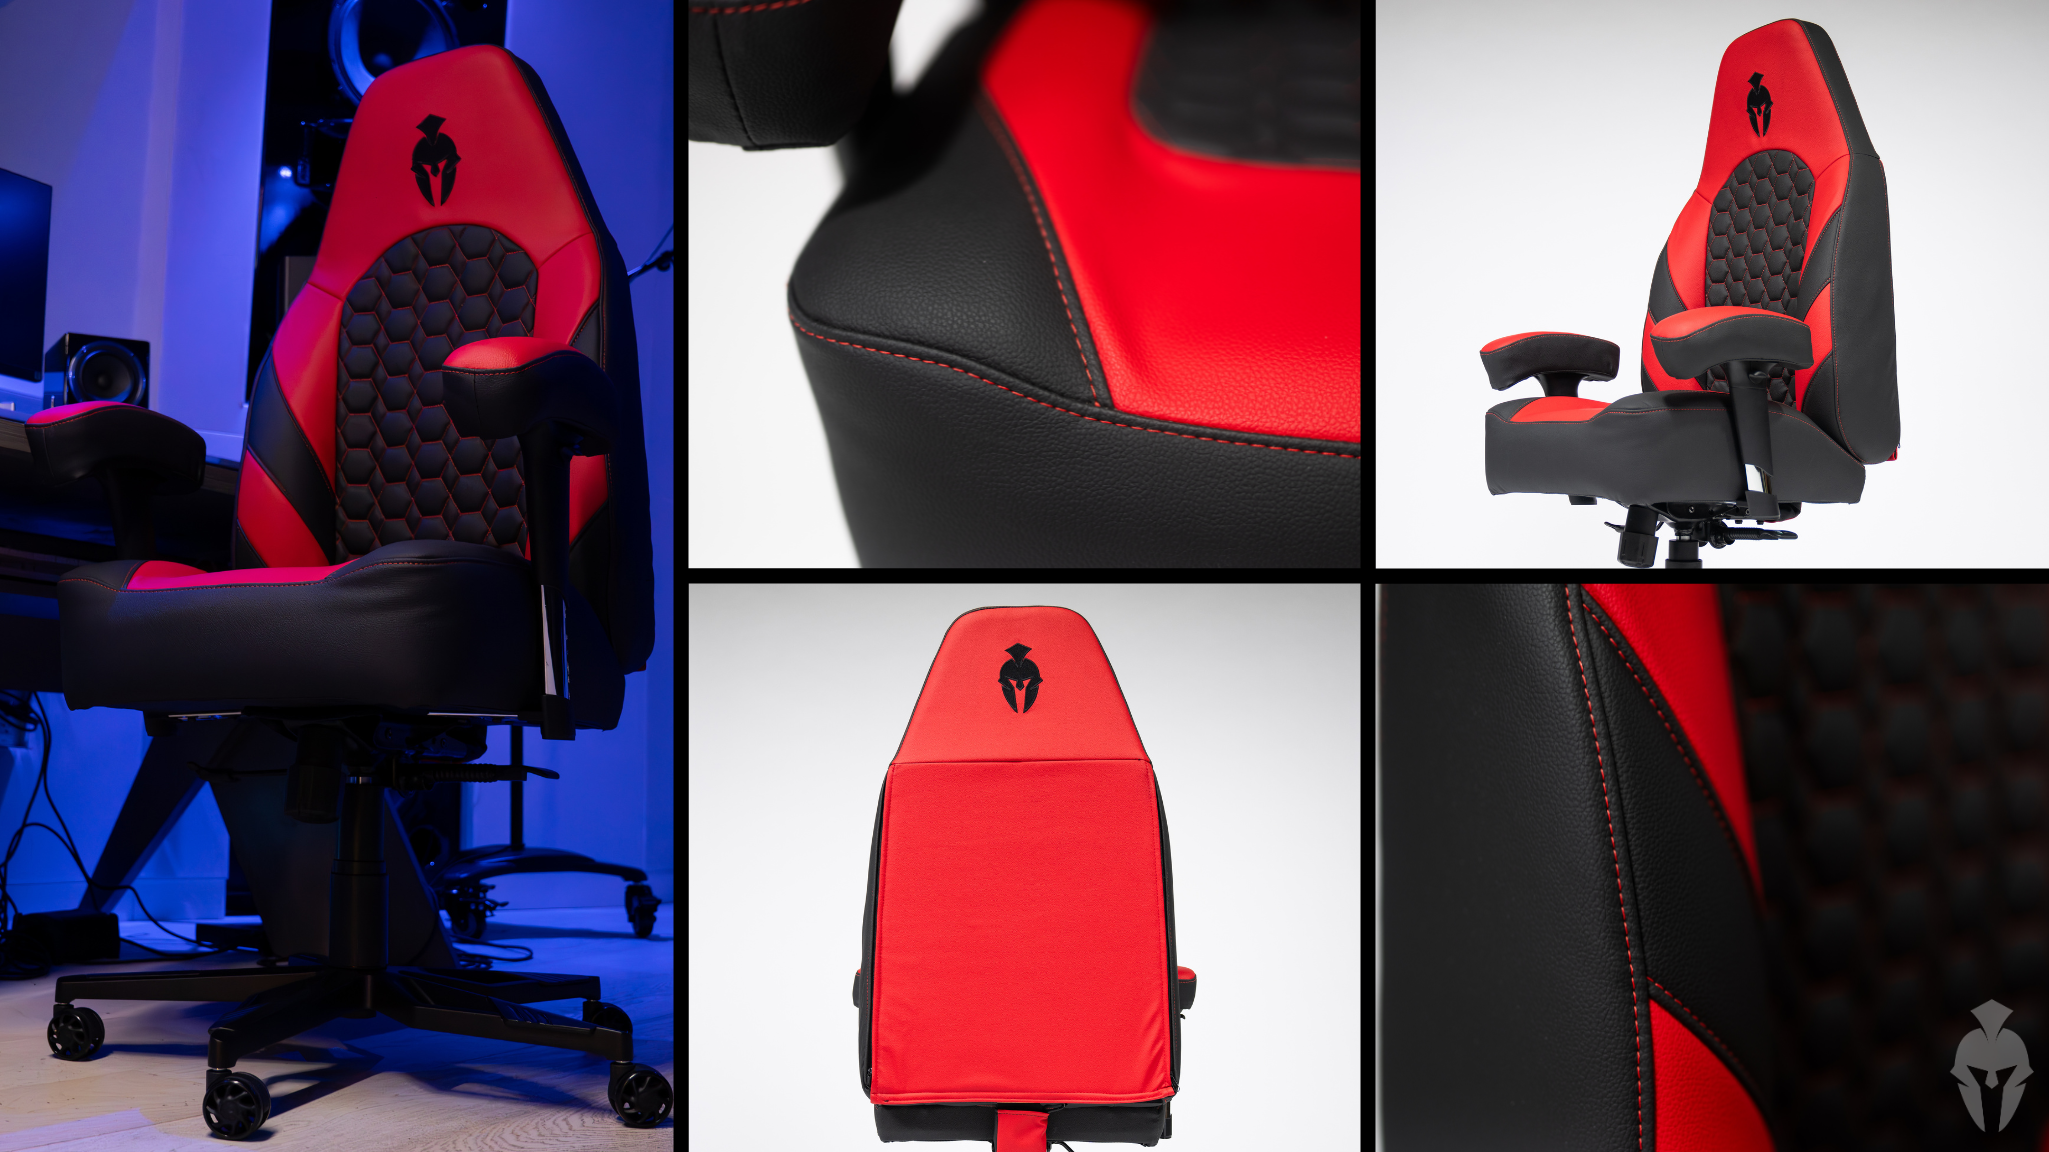 Multiple images of a red and black gaming chair Kratos showing all their details in multiple angles